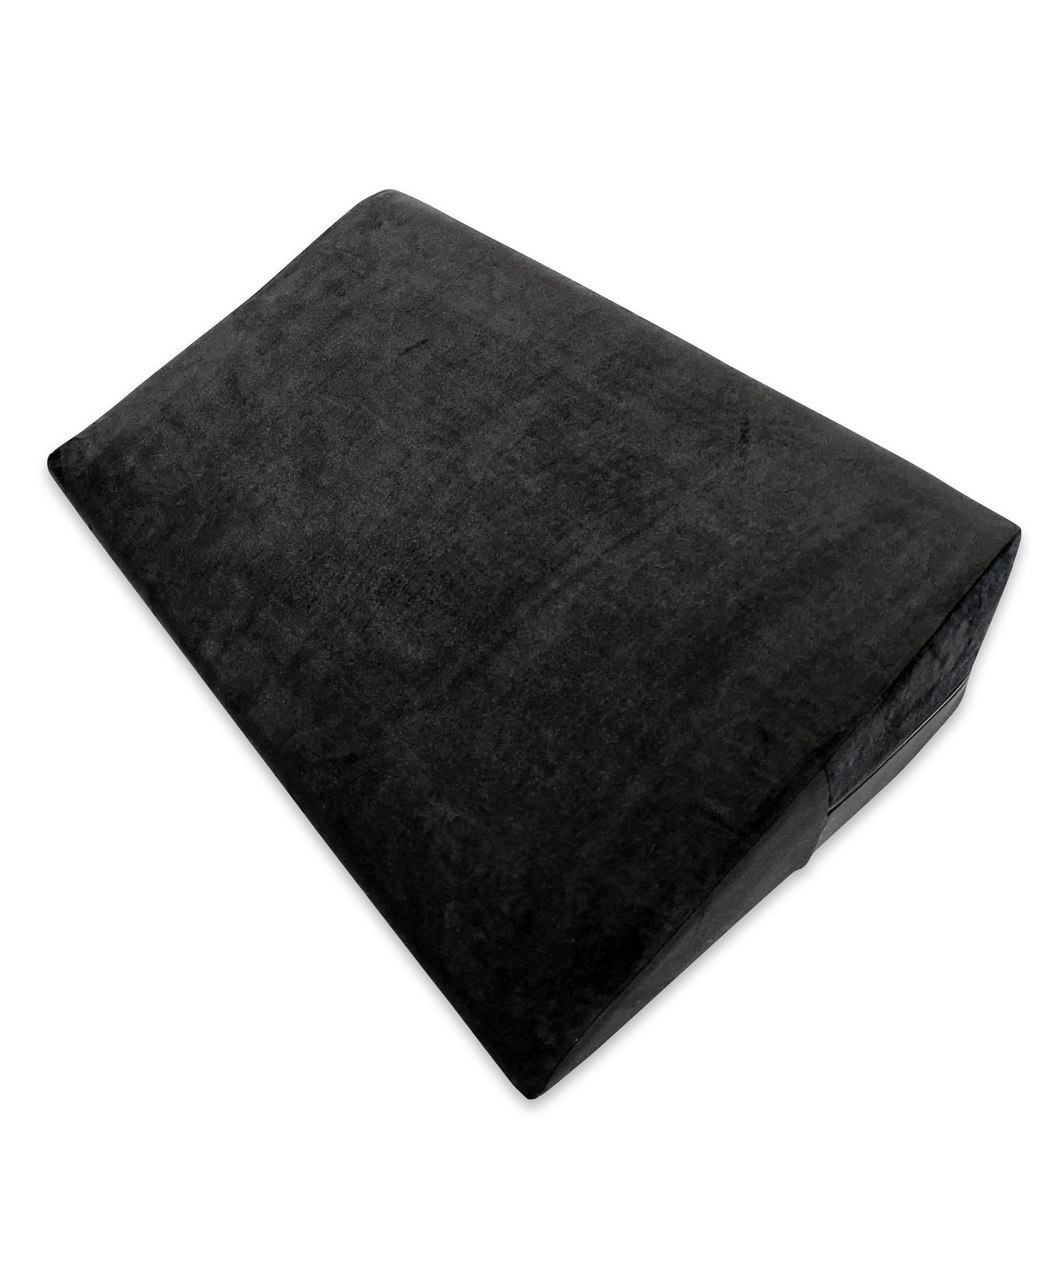 SexyStyle black wedge pillow